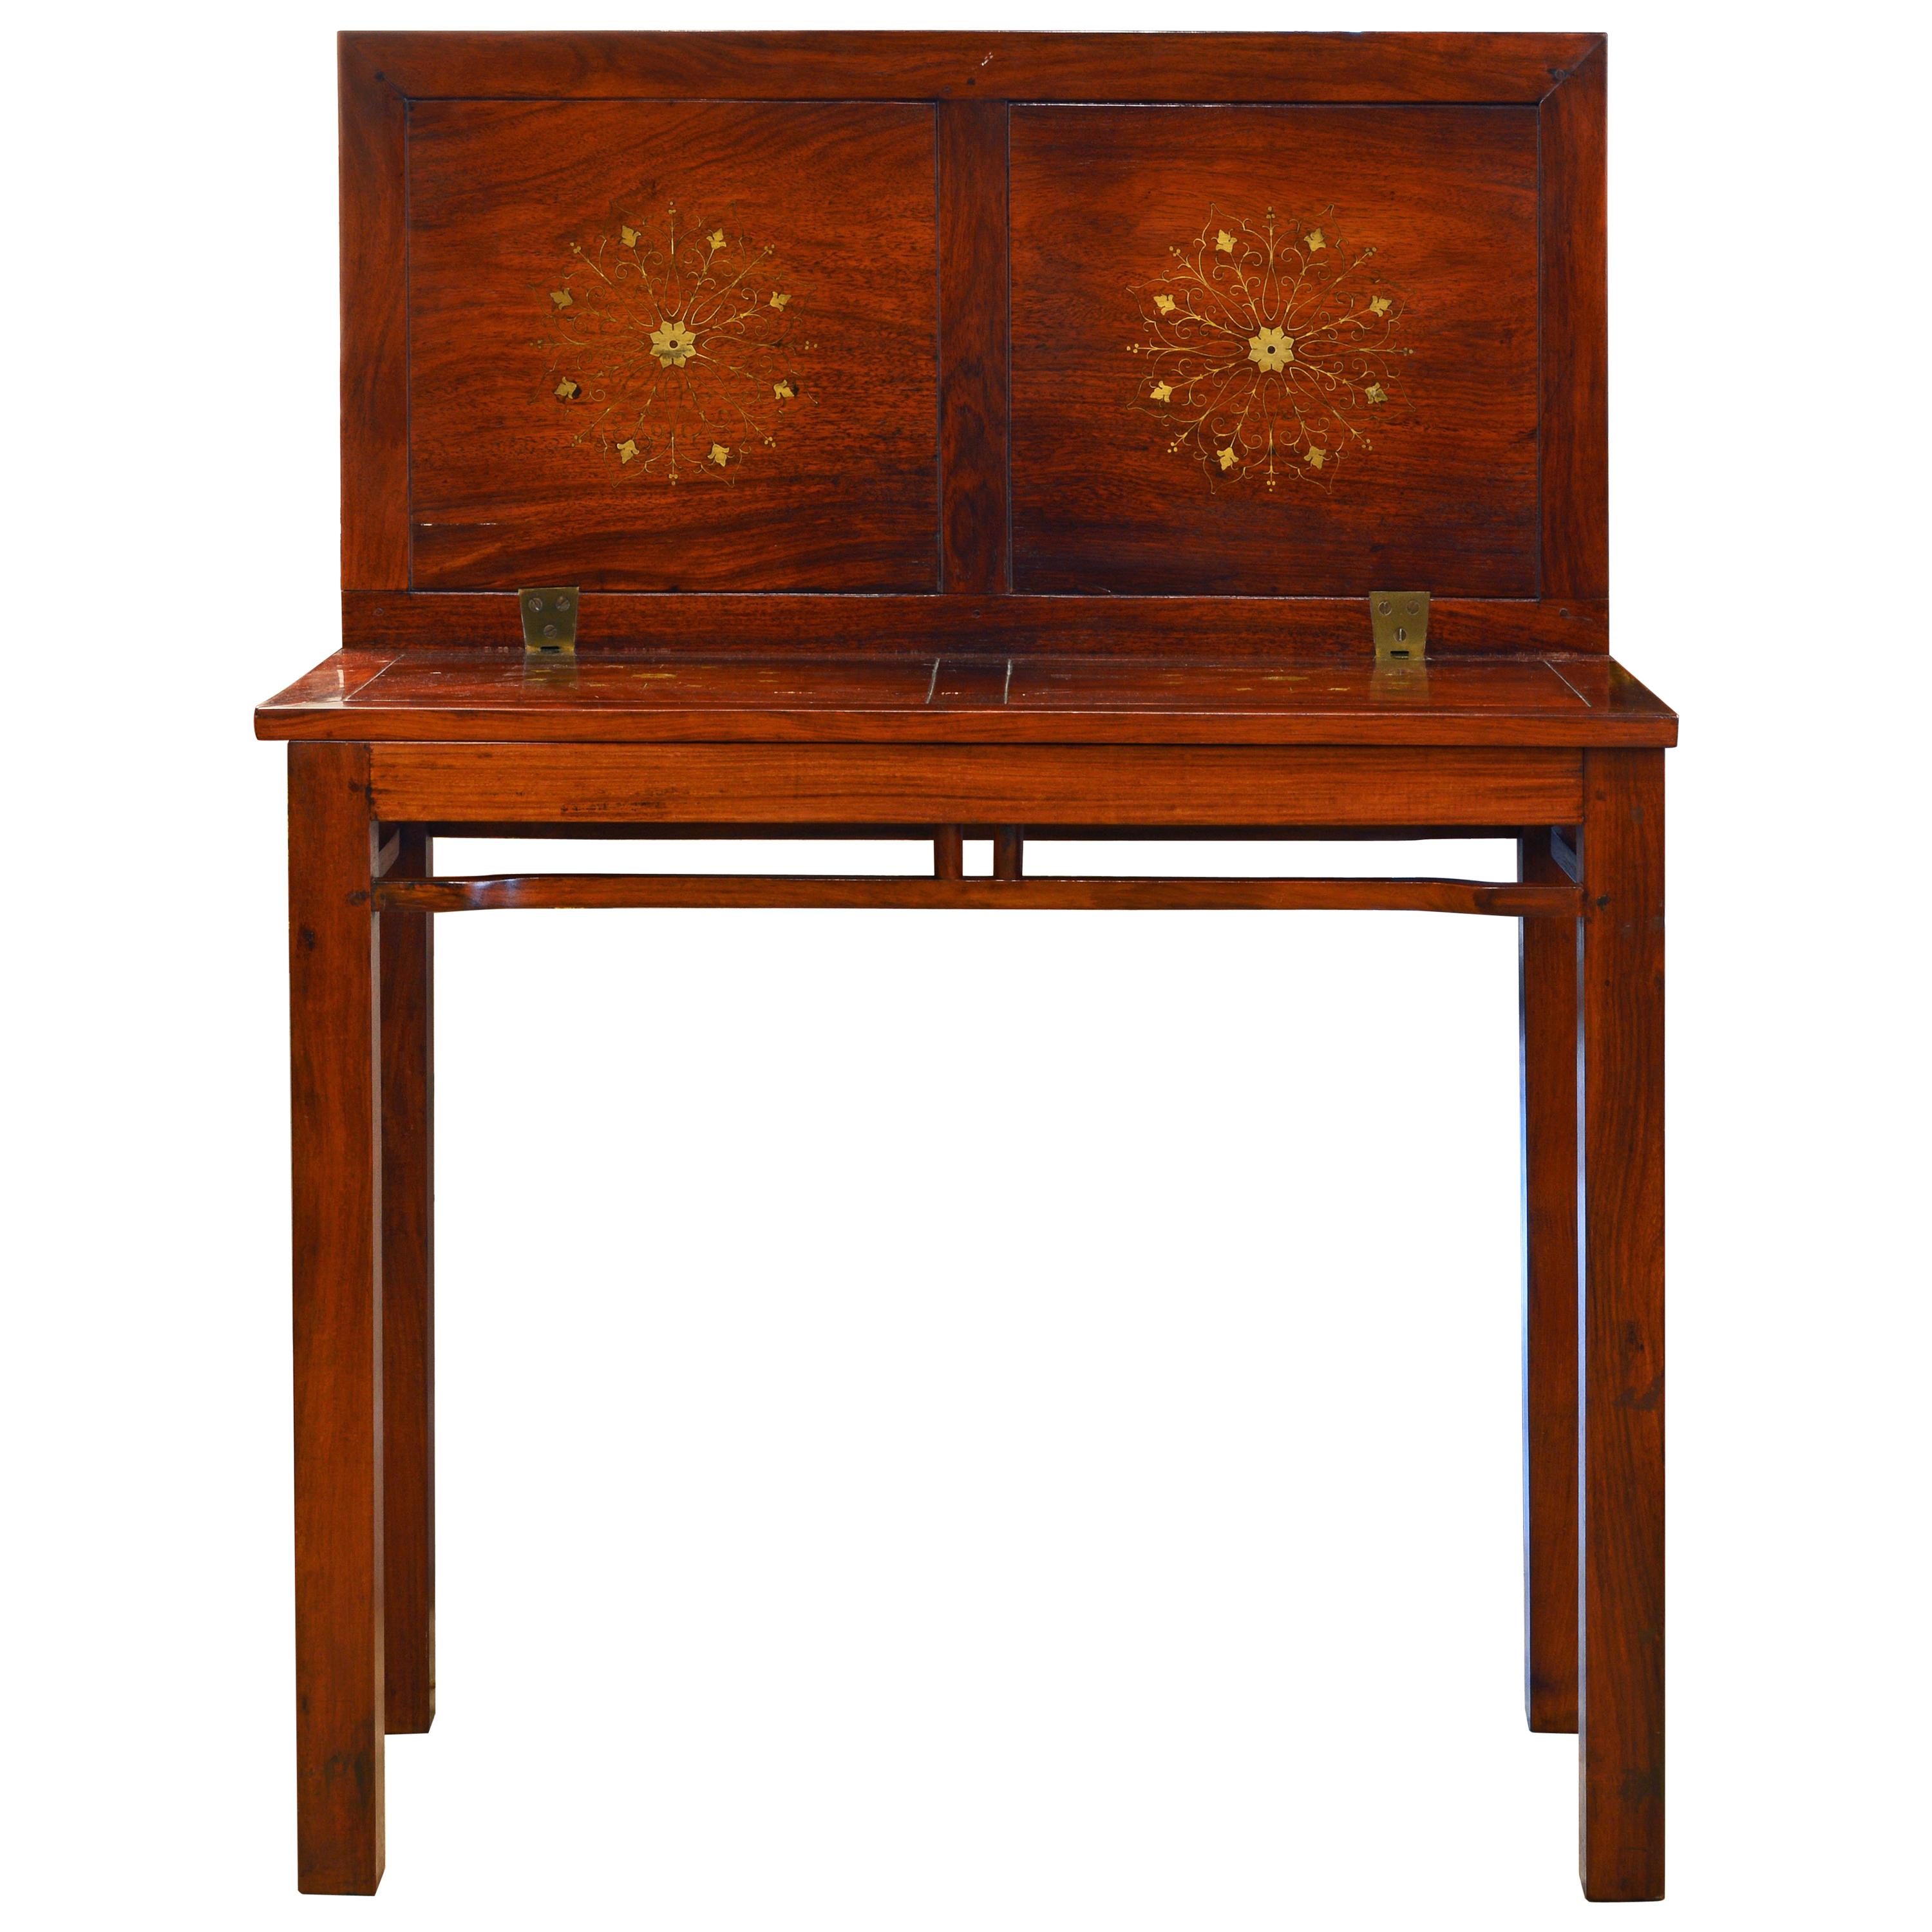 Superior 20th Century Anglo-Chinese Style Brass Inlaid Hardwood Game Table